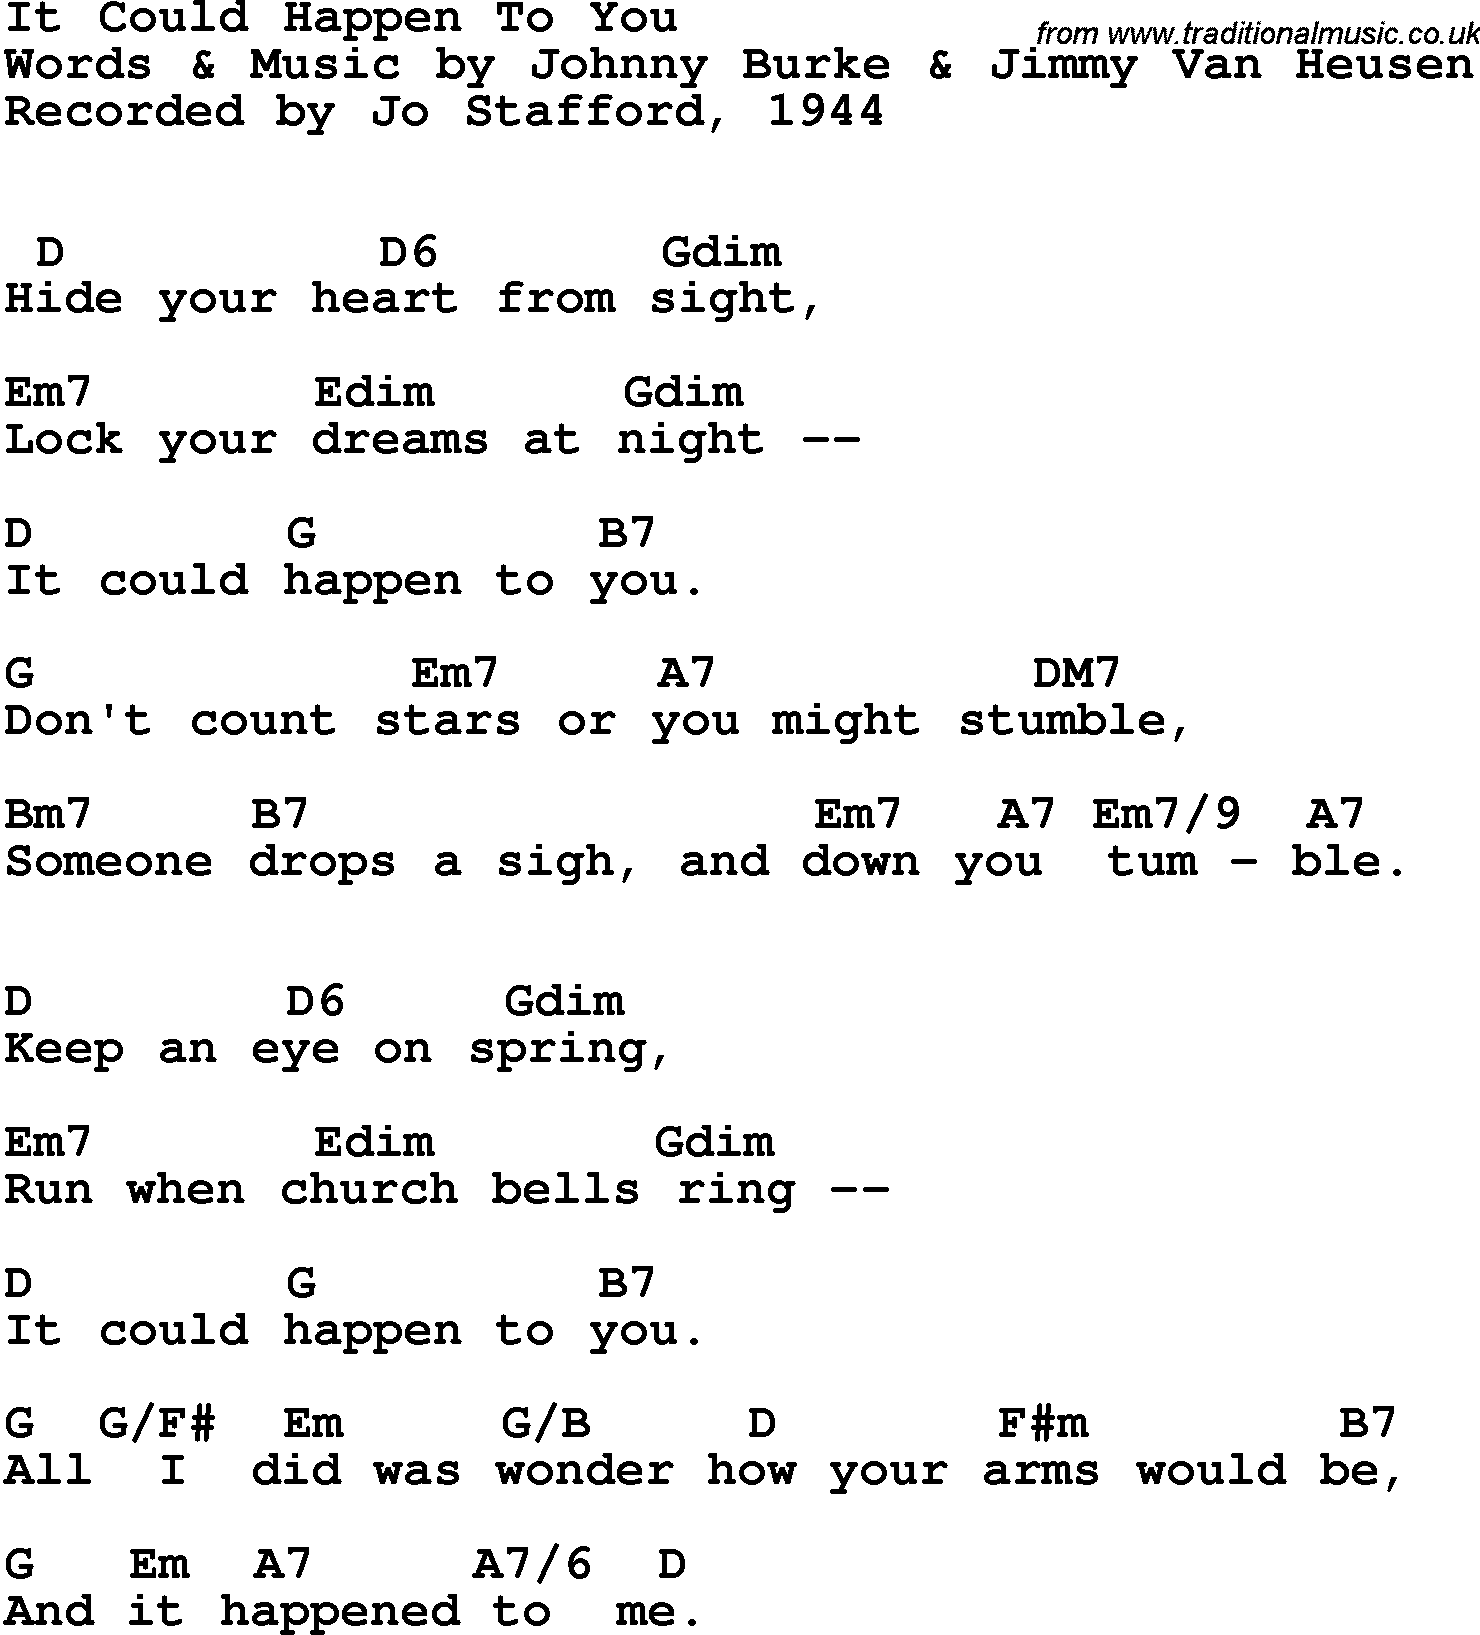 Song Lyrics with guitar chords for It Could Happen To You - Jo Stafford, 1944